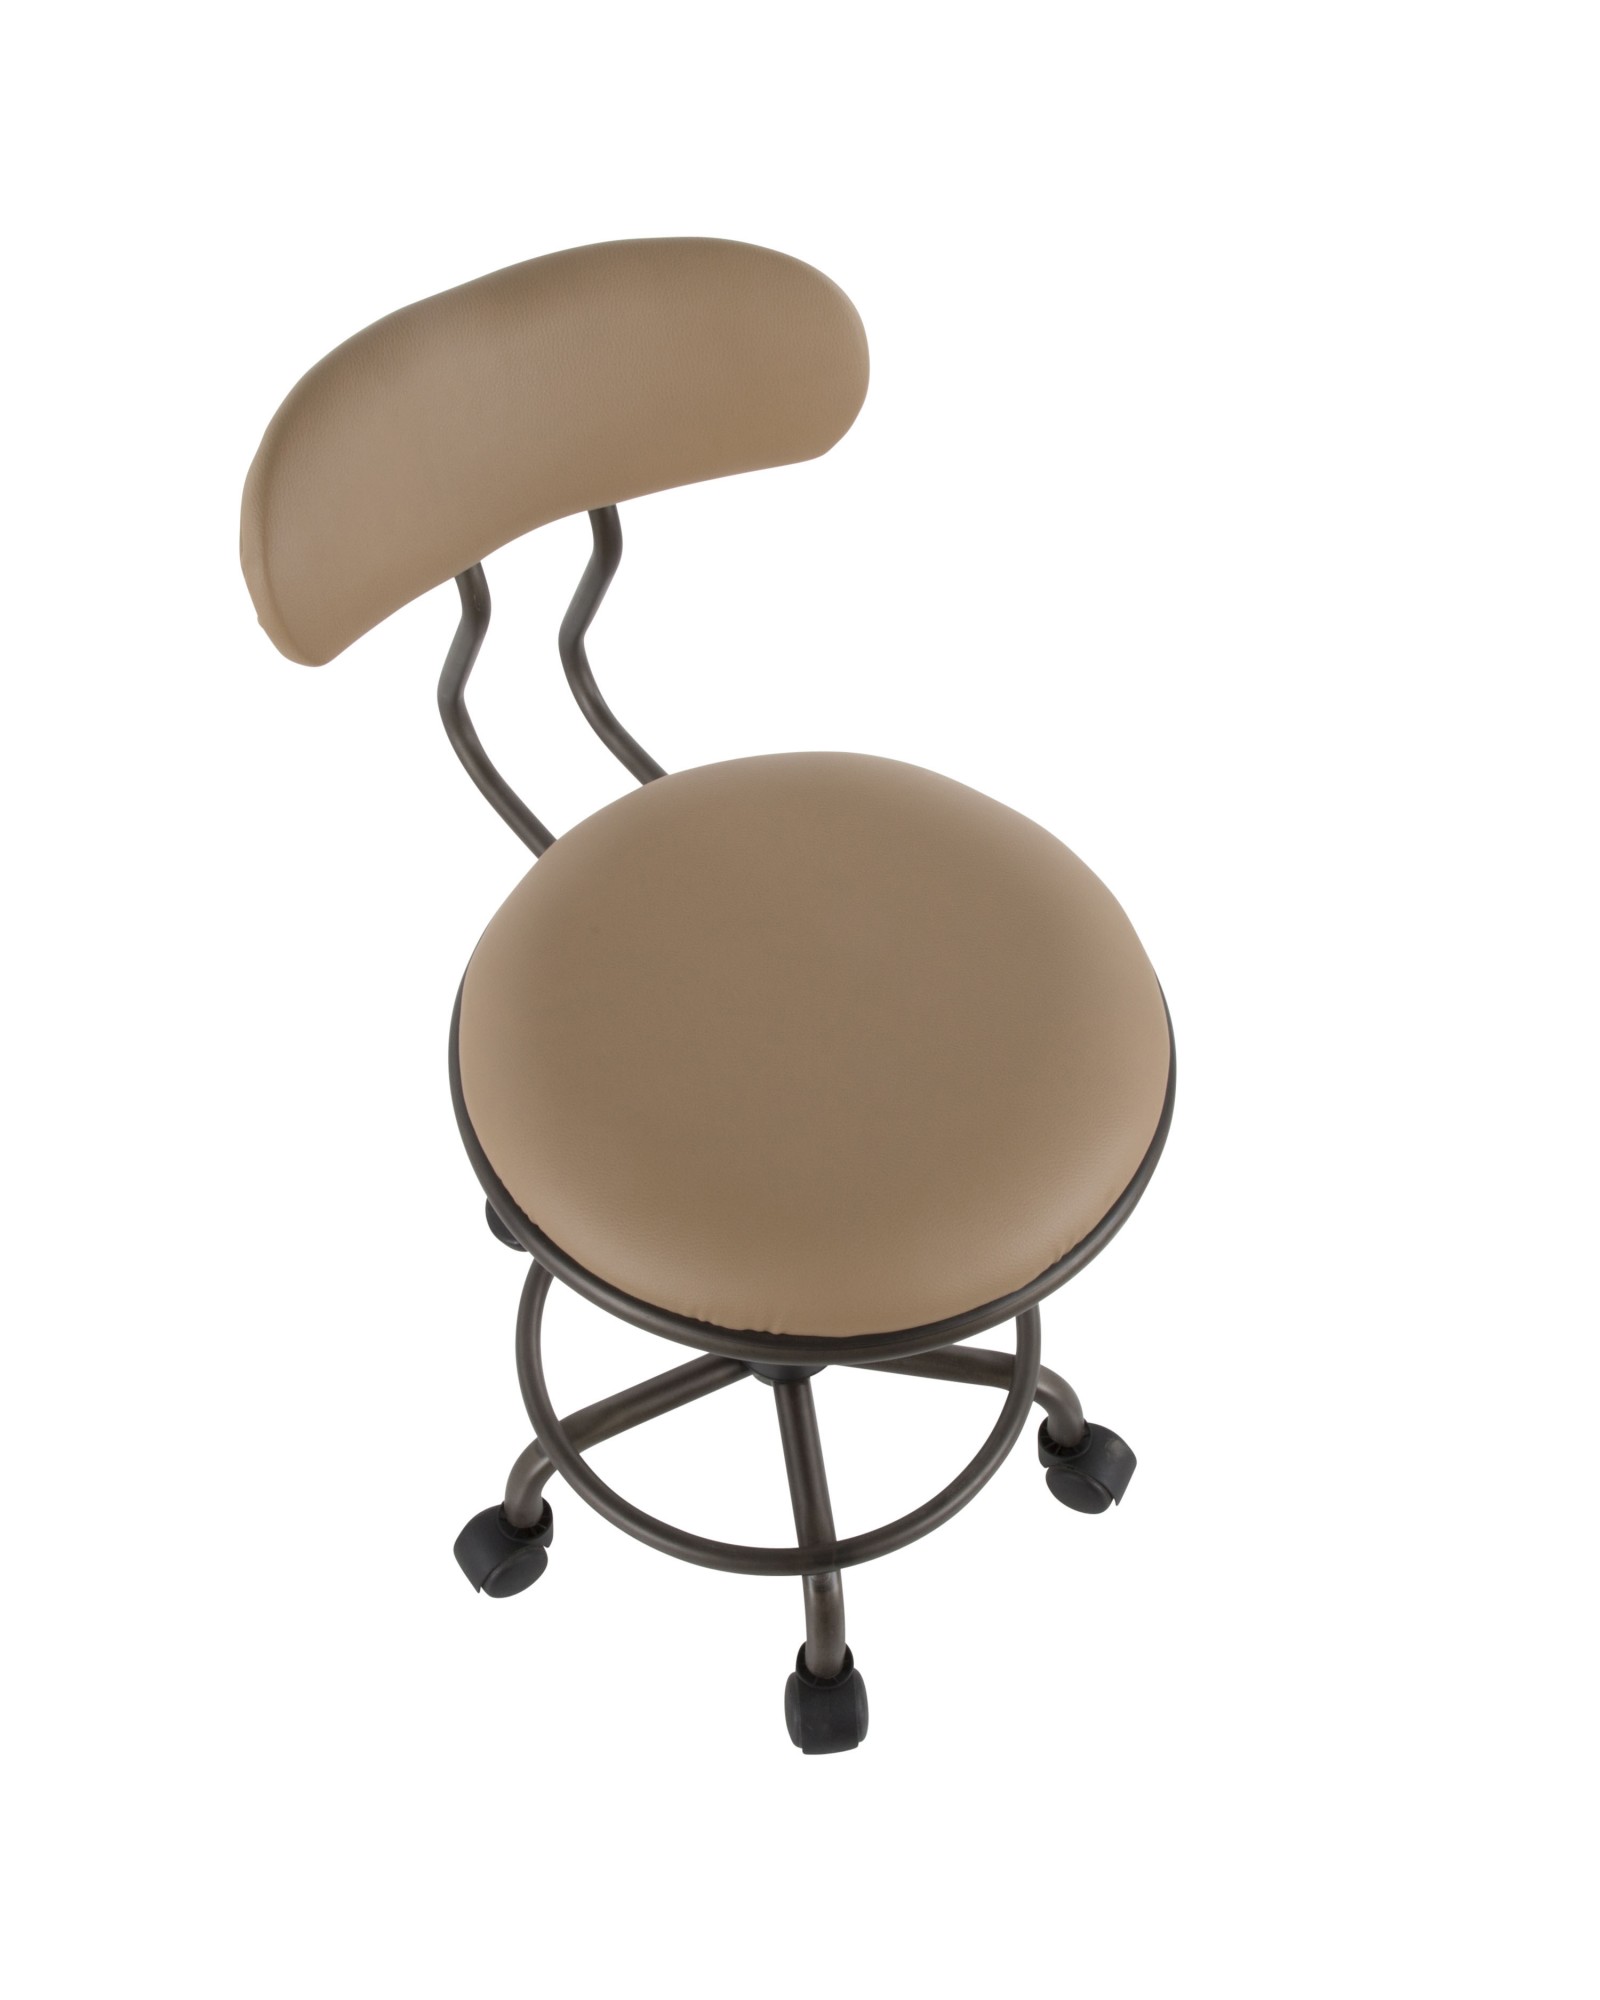 Swift Industrial Task Chair in Antique Metal and Camel Faux Leather